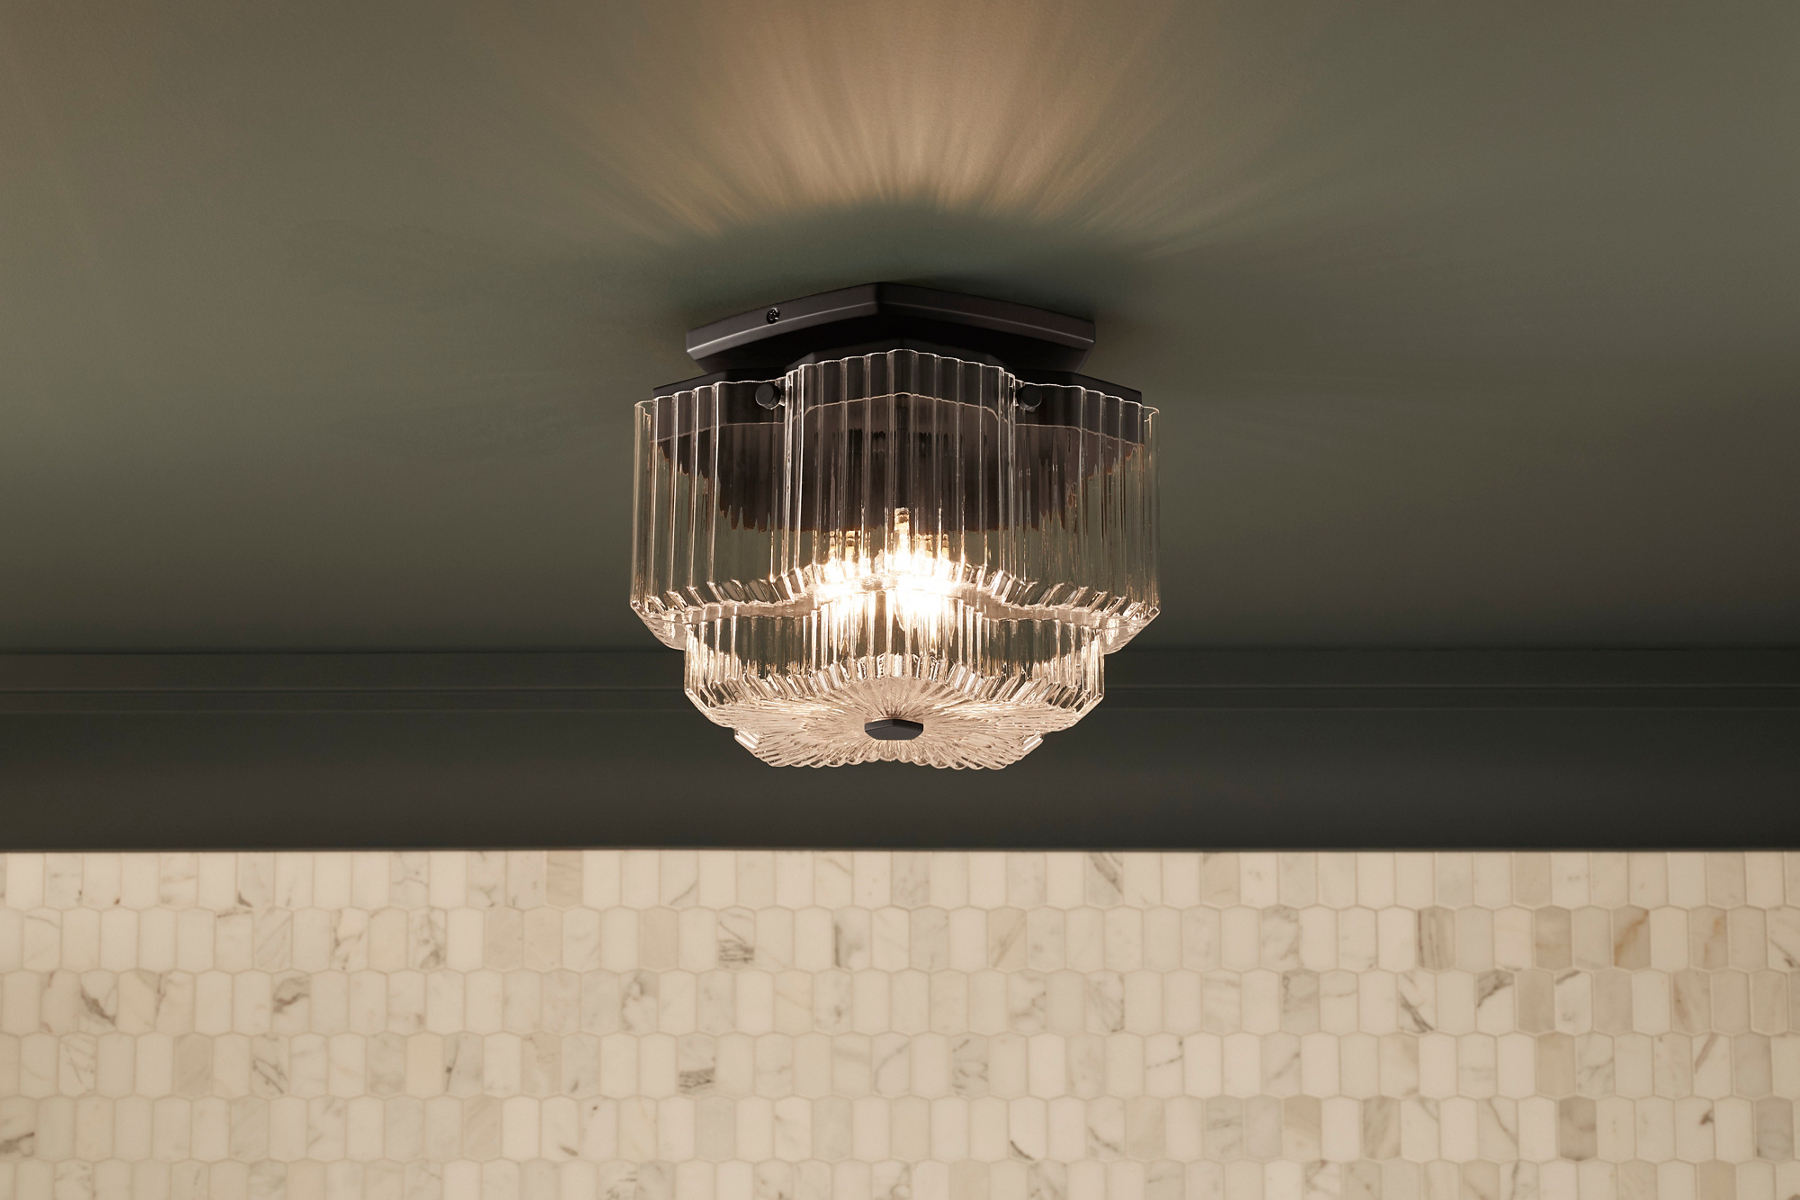 A KOHLER Occasions flush-mount light fixture with ridged glass shade casts a rippled reflection on a dark gray ceiling.